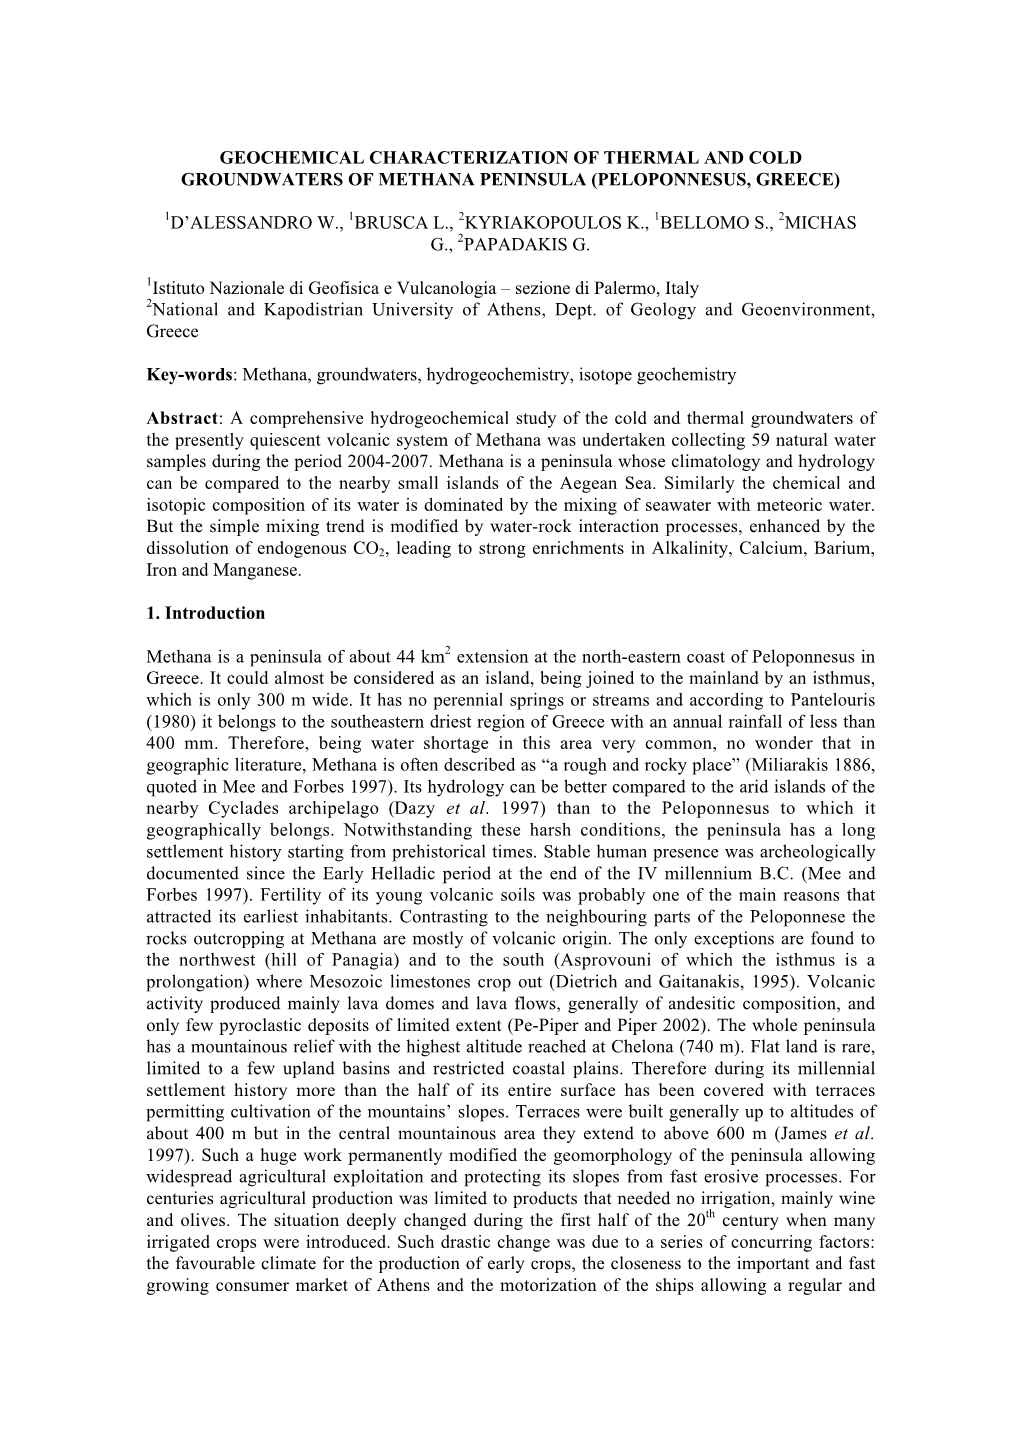 Geochemical Characterization of Thermal and Cold Groundwaters of Methana Peninsula (Peloponnesus, Greece)